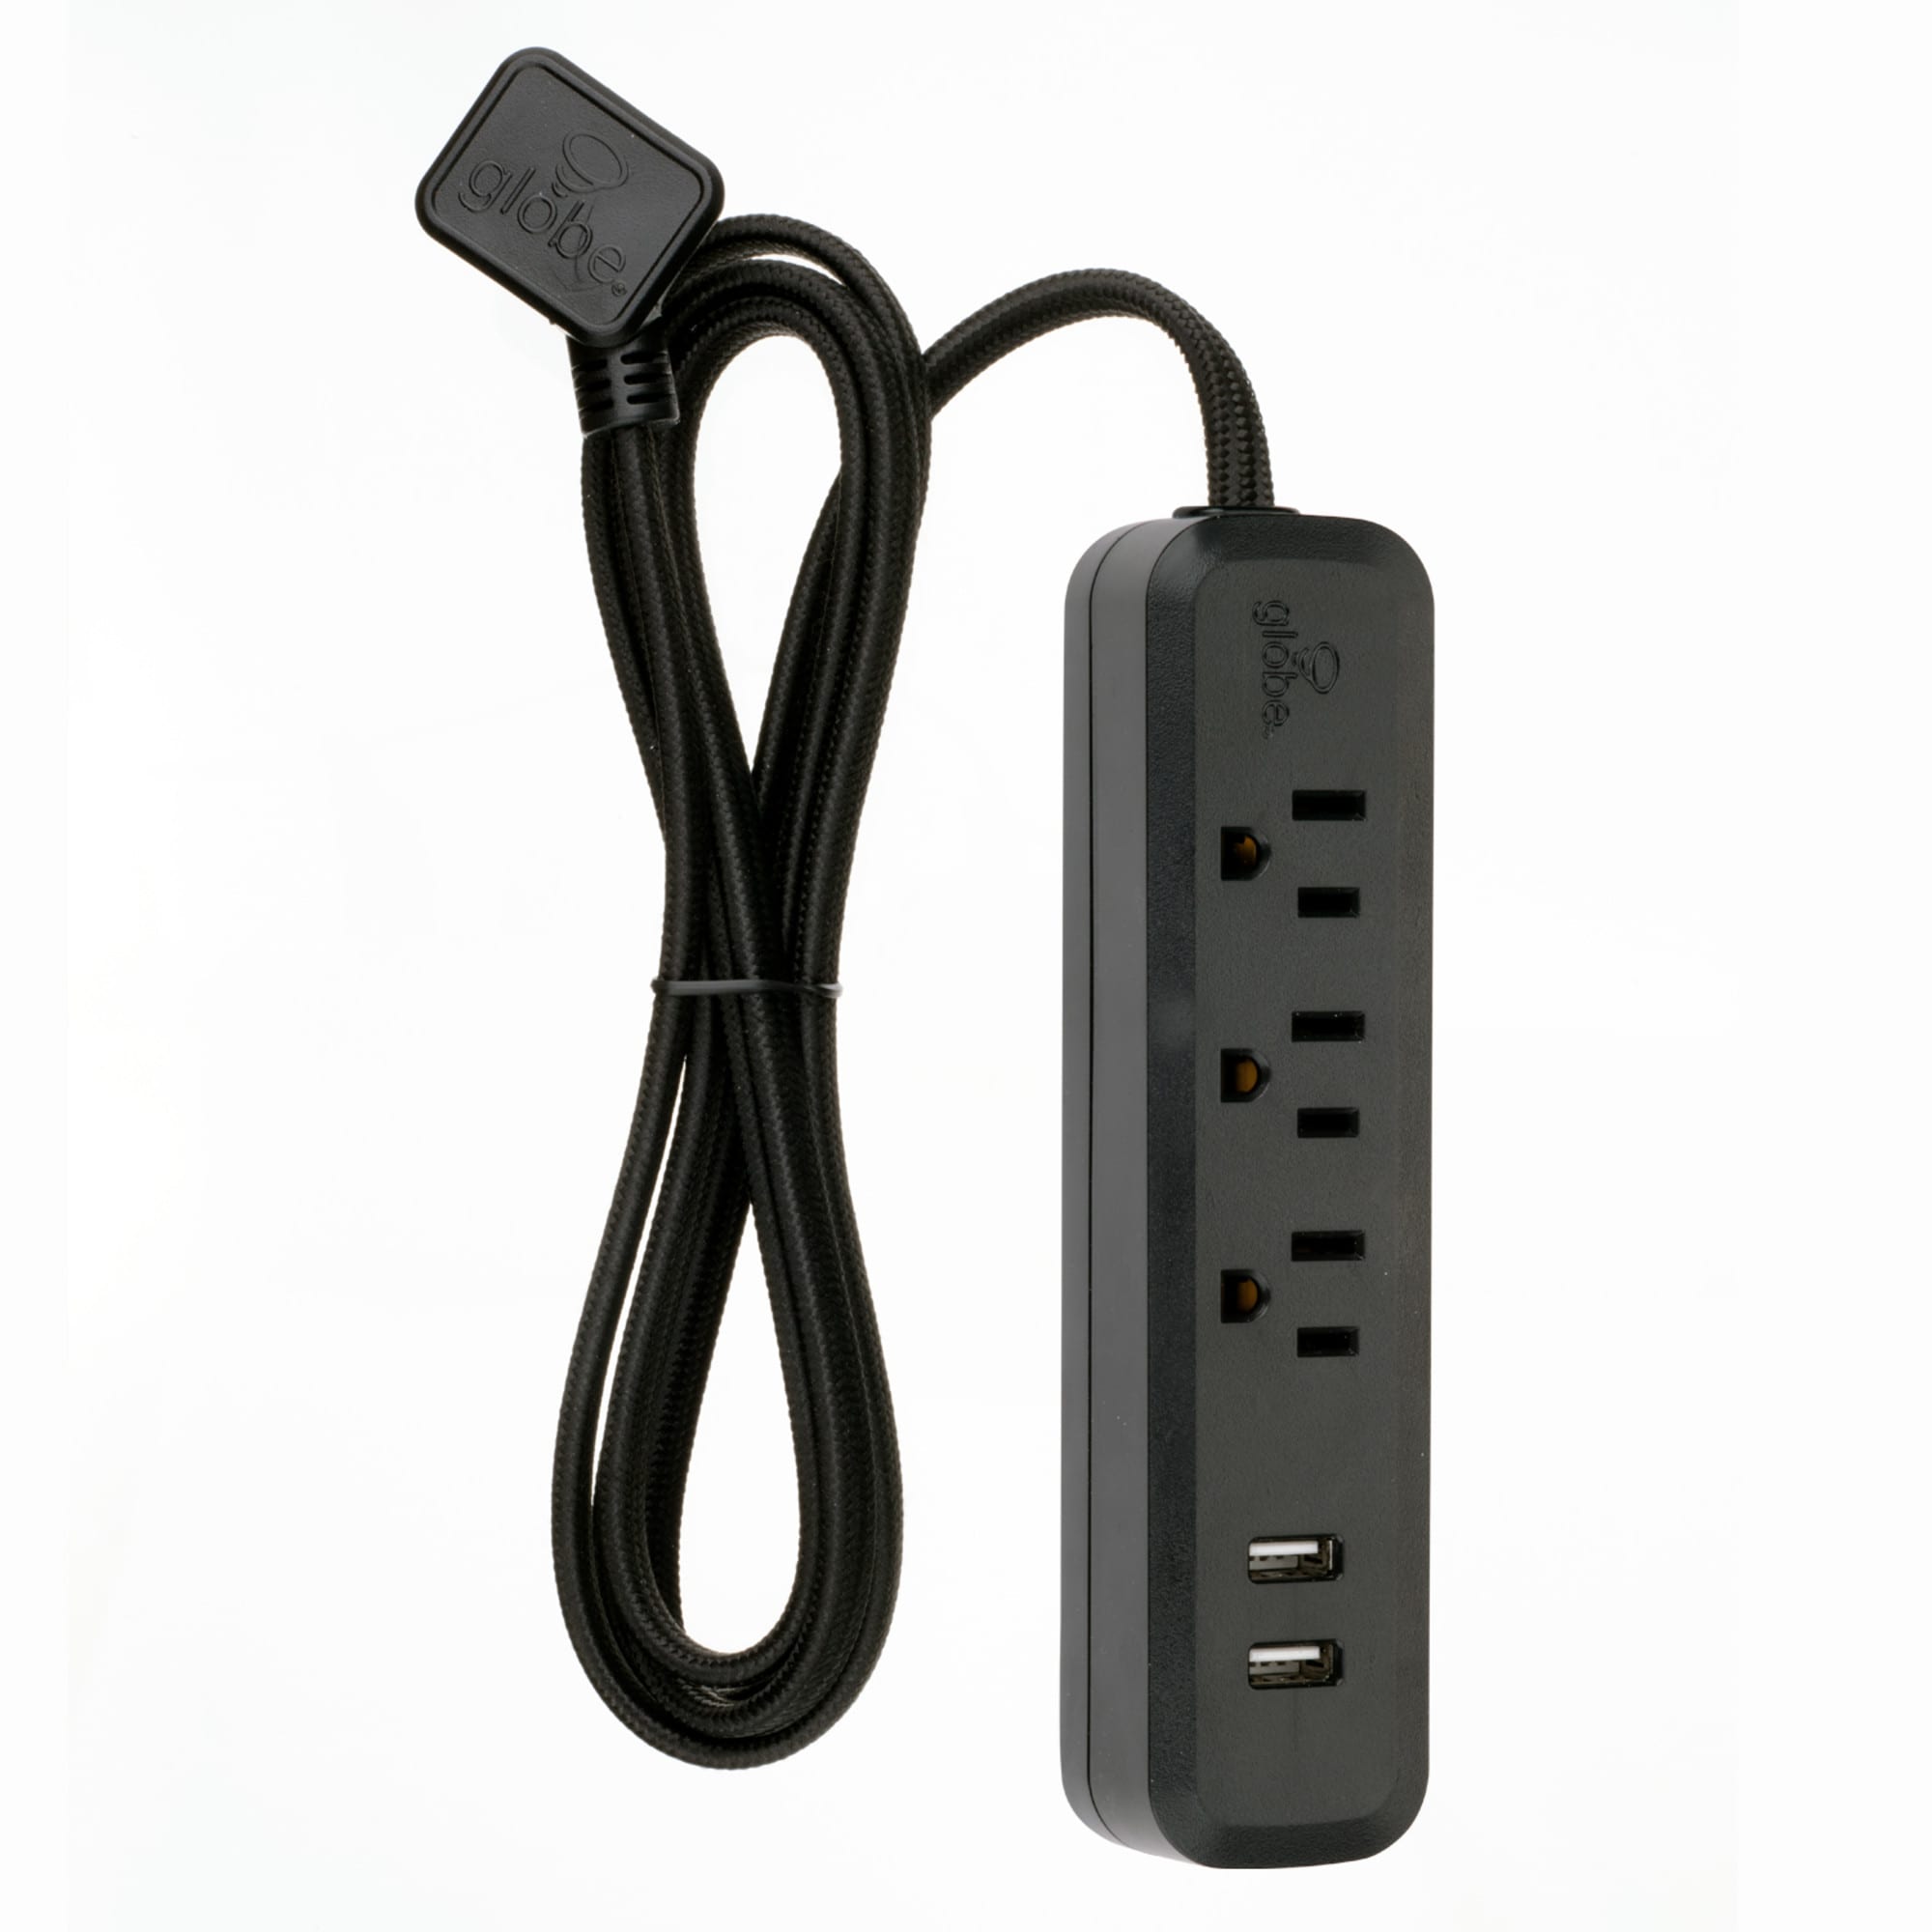 Woods 41379 4-Outlet L-Shaped Surge Protector With 2 USB Ports at